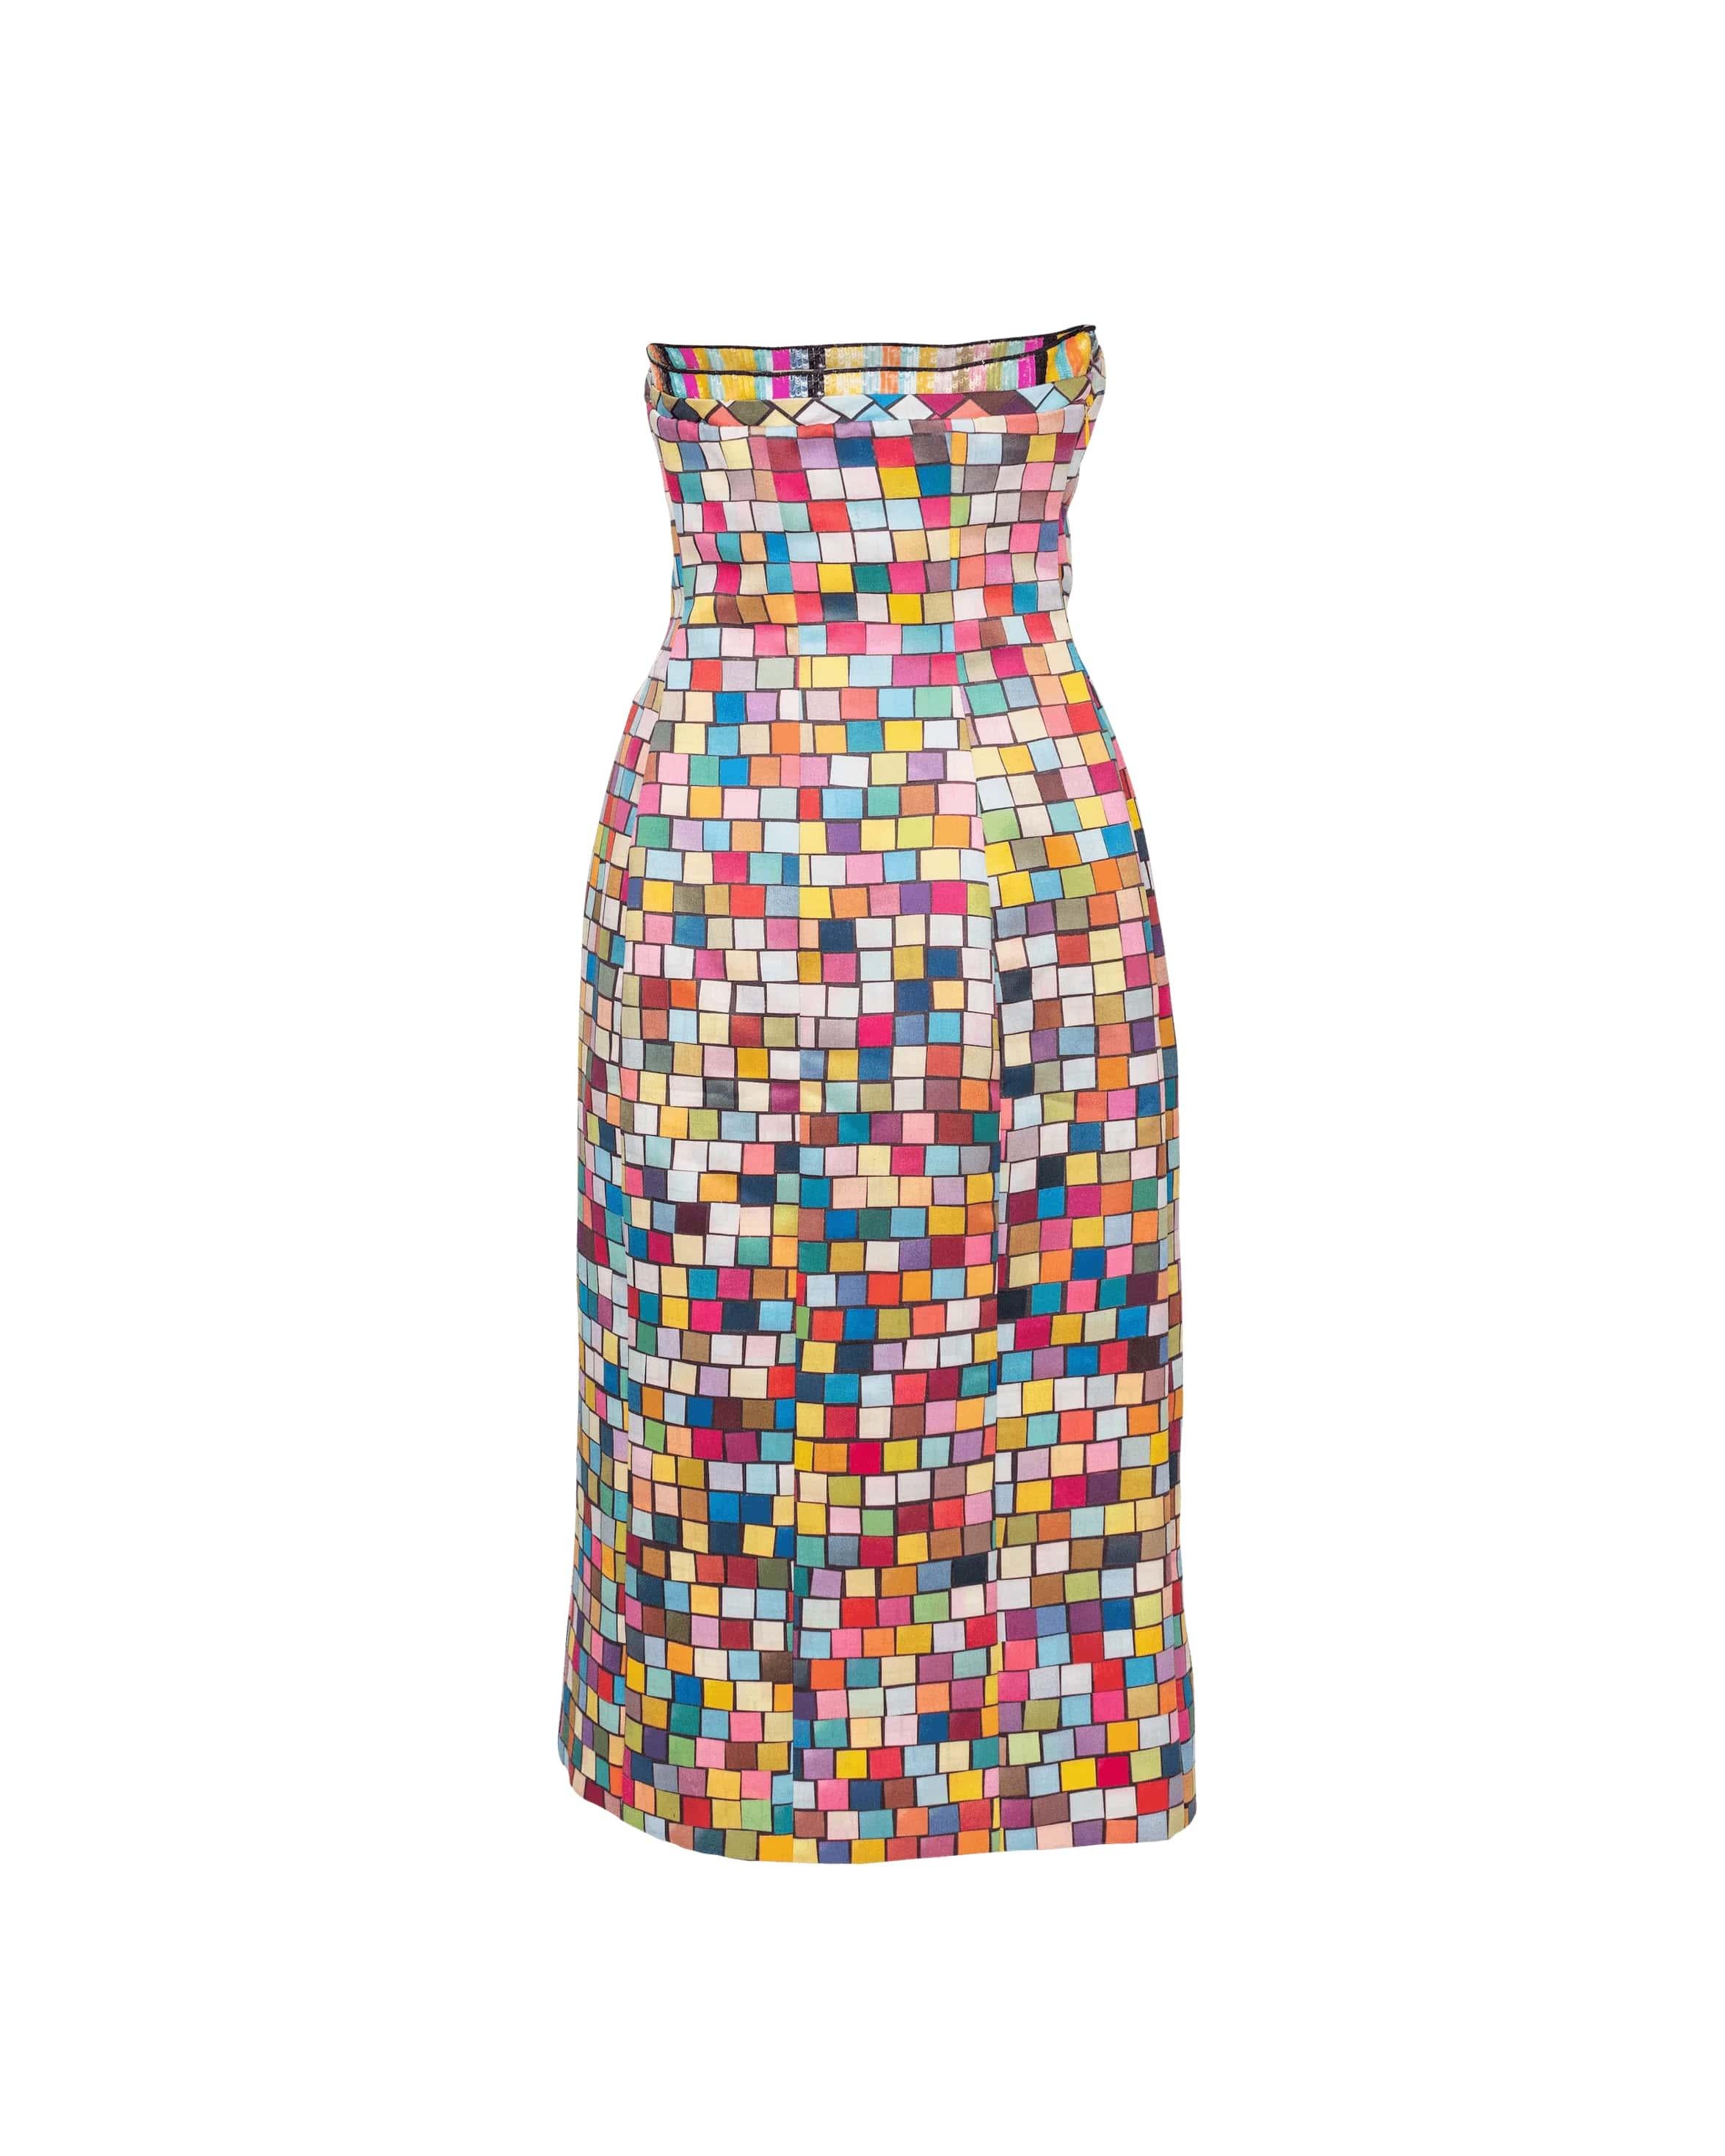 S/S 1996 Todd Oldham Rainbow Brick Patterned Midi Dress In Good Condition In North Hollywood, CA